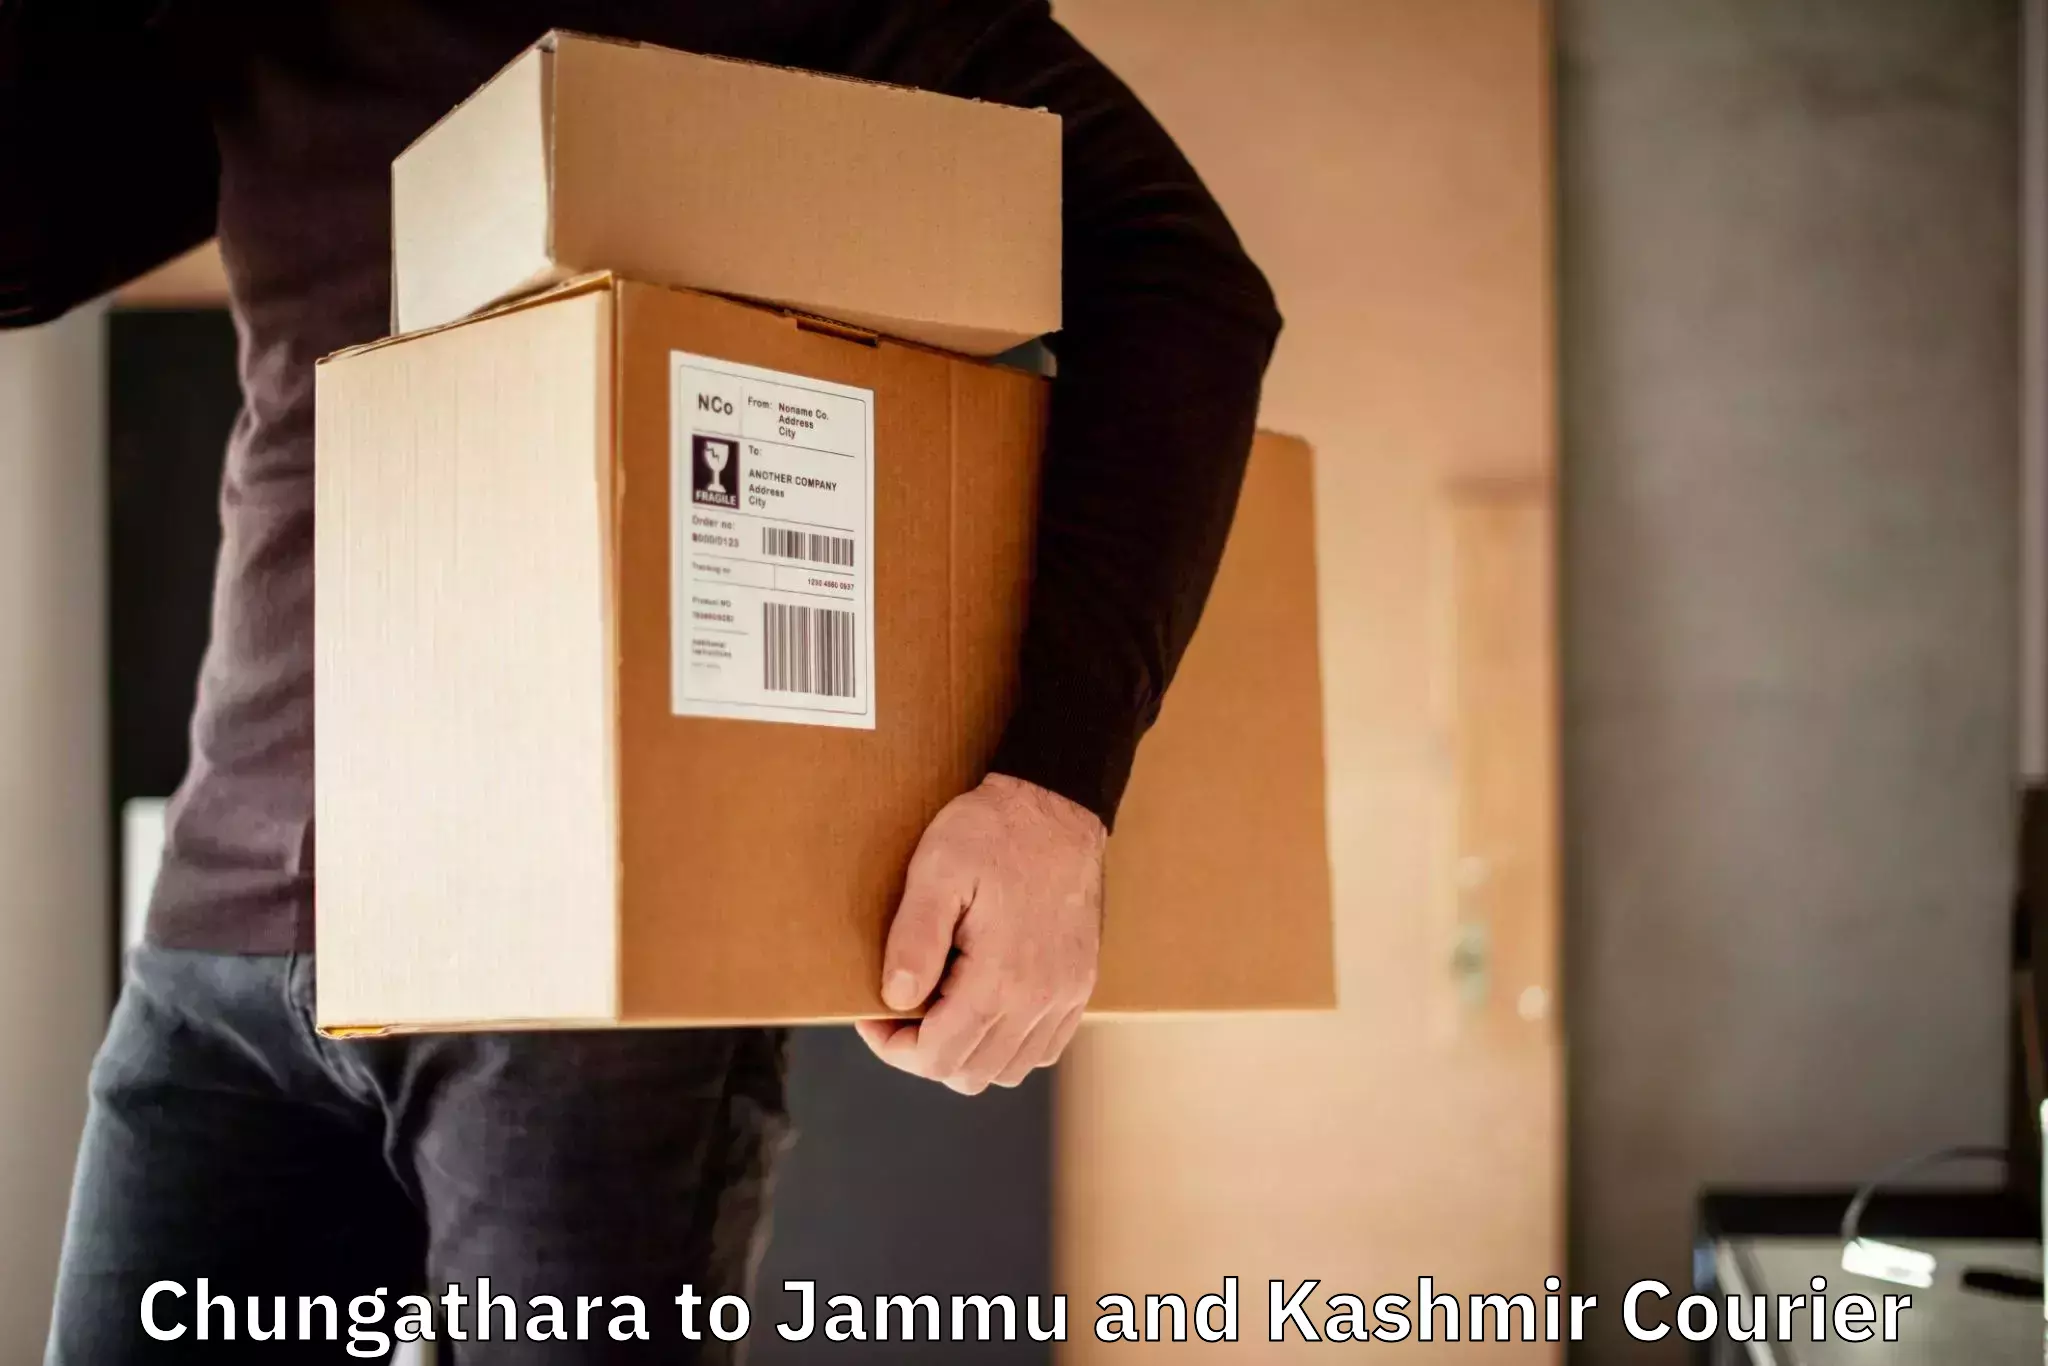 Business delivery service Chungathara to Udhampur